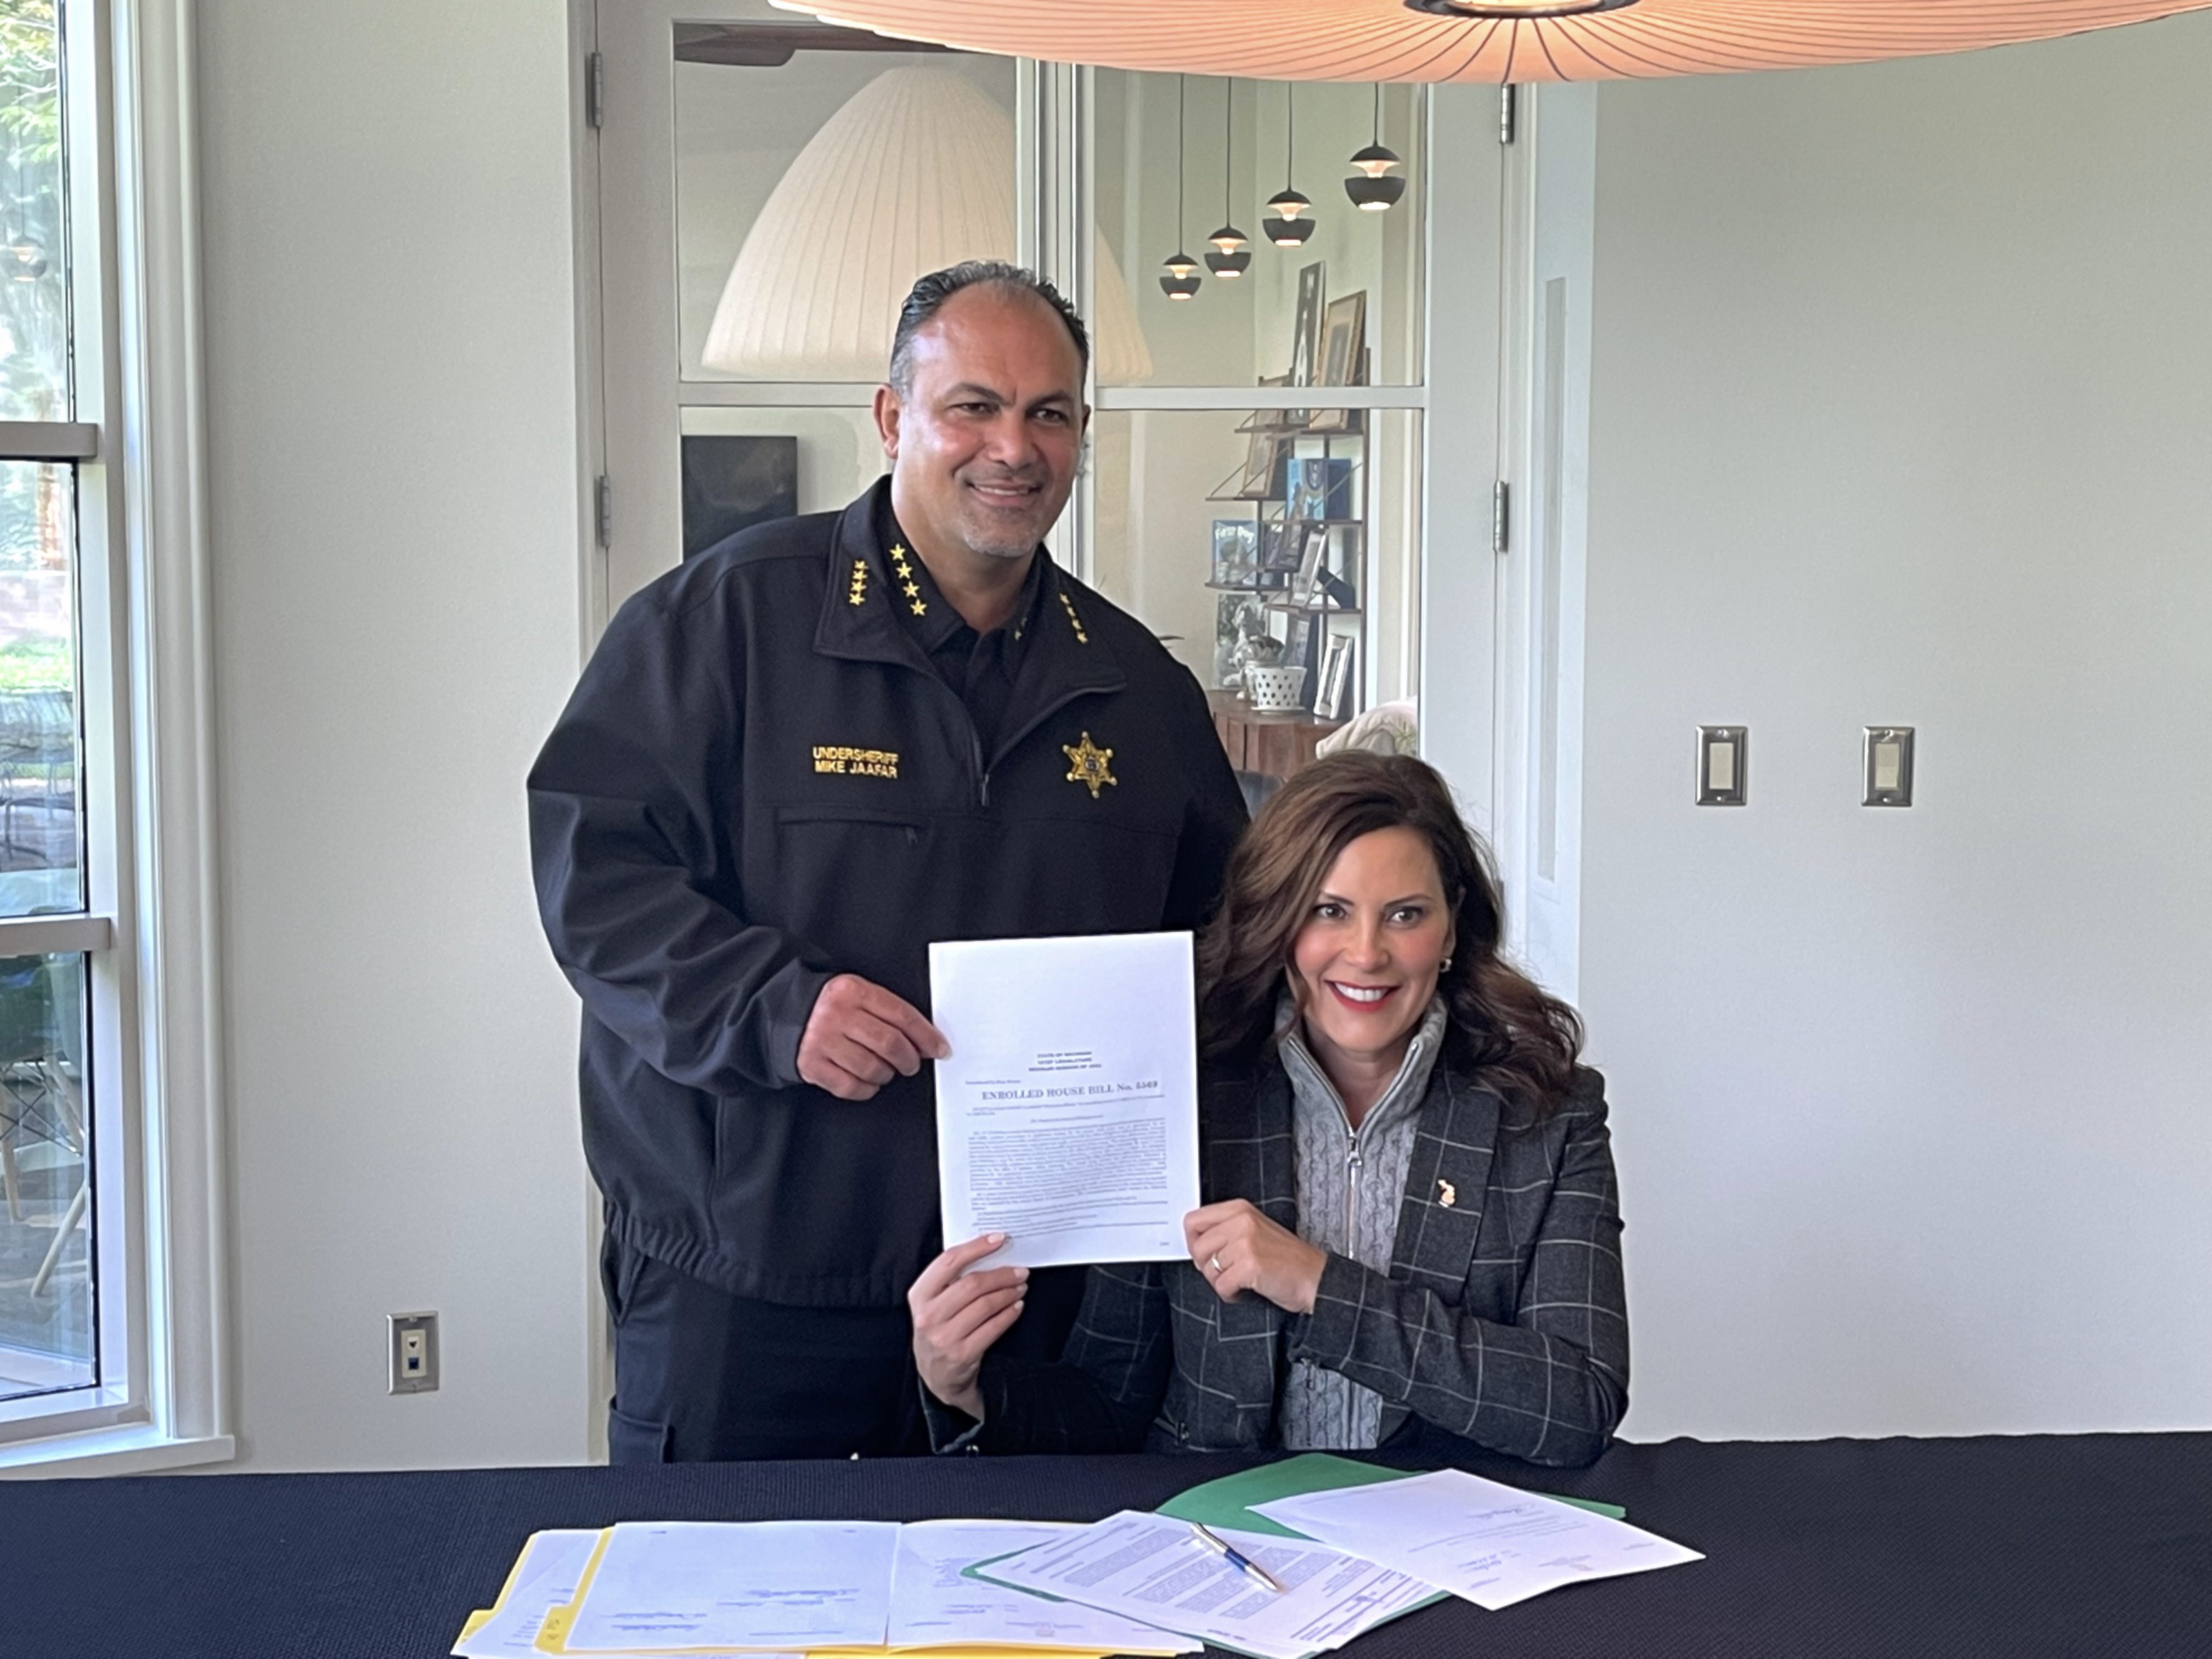 Governor Whitmer with Wayne County Undersheriff Mike Jaafar, Sept. 27. File photo